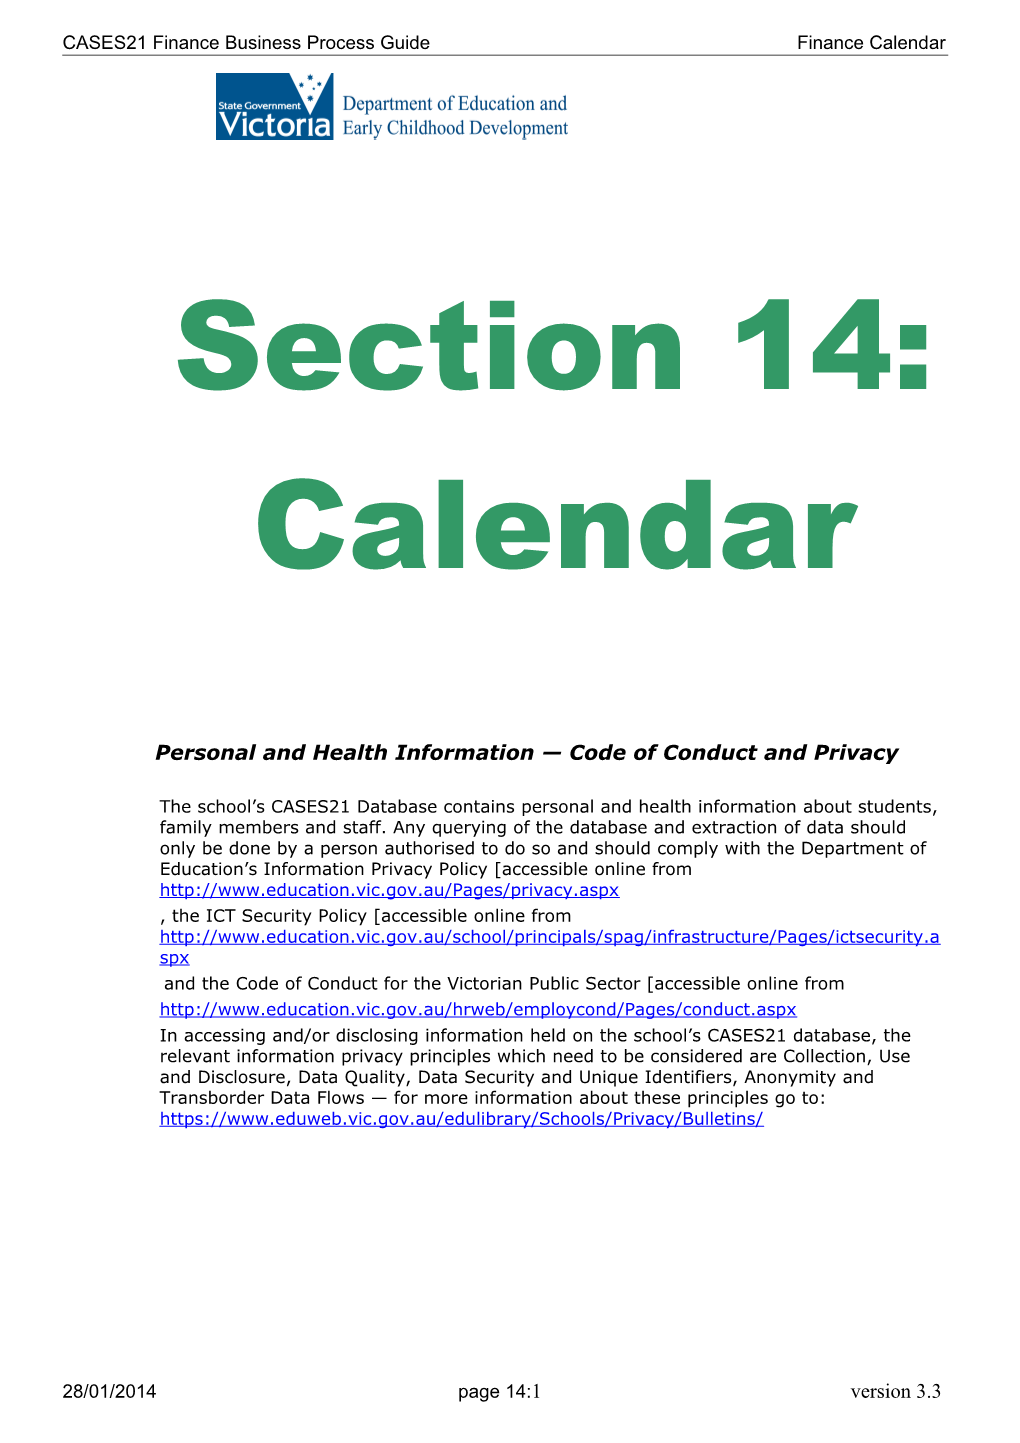 Personal and Health Information Code of Conduct and Privacy